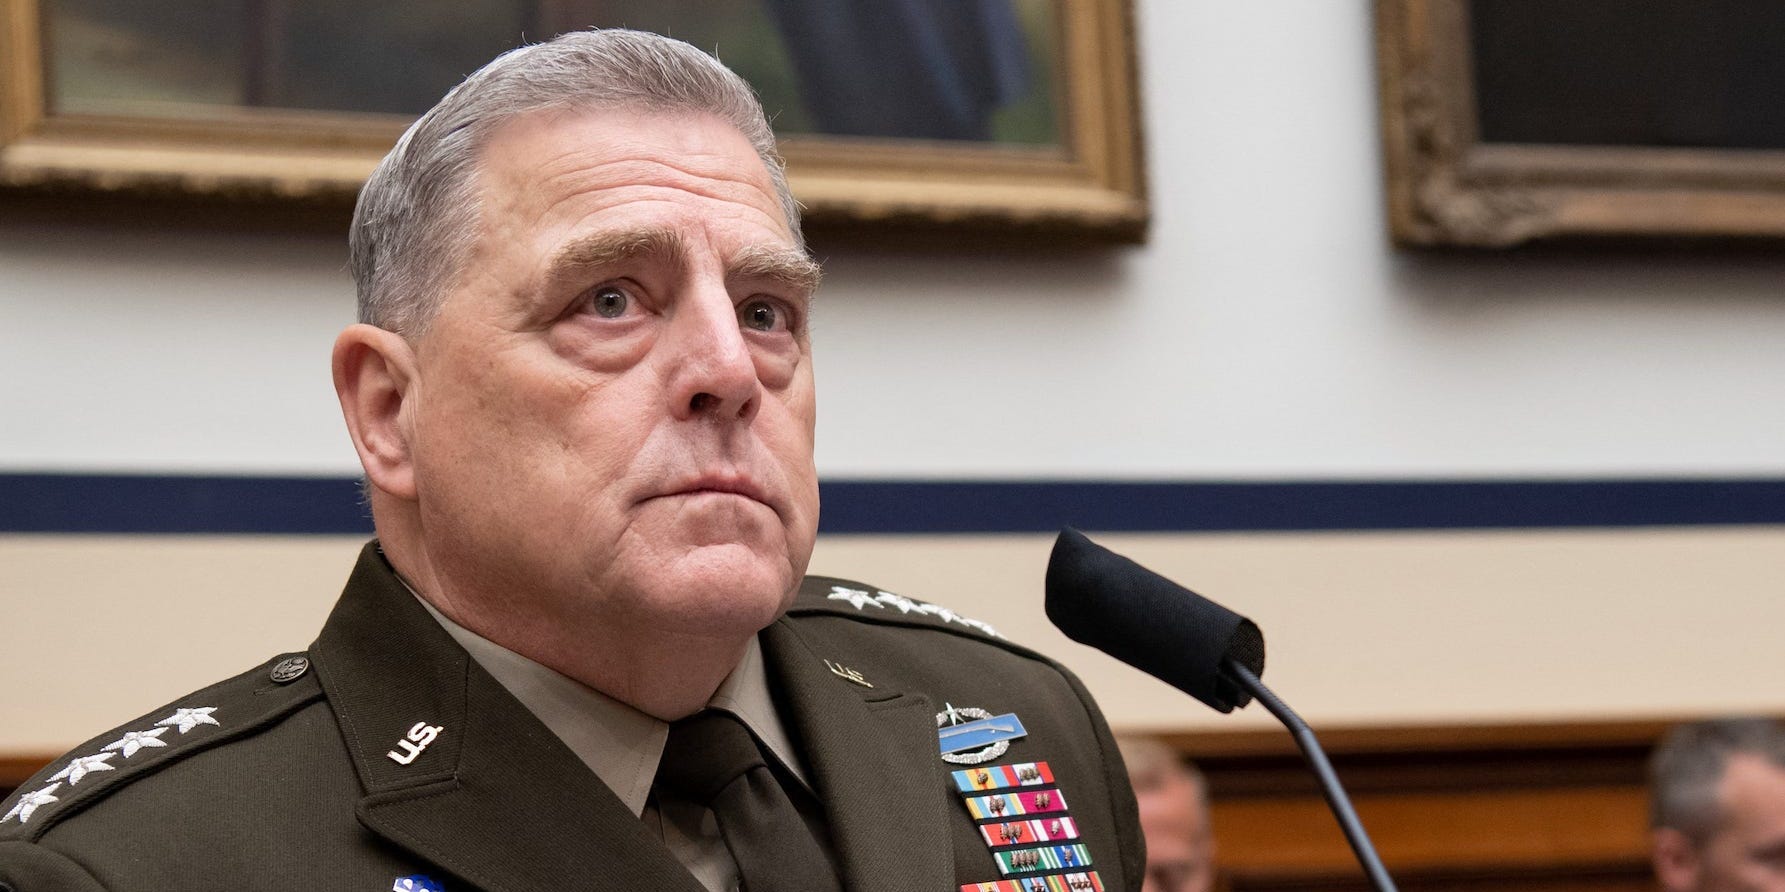 Republicans call Gen Mark Milley #39 traitor #39 and say he should be fired